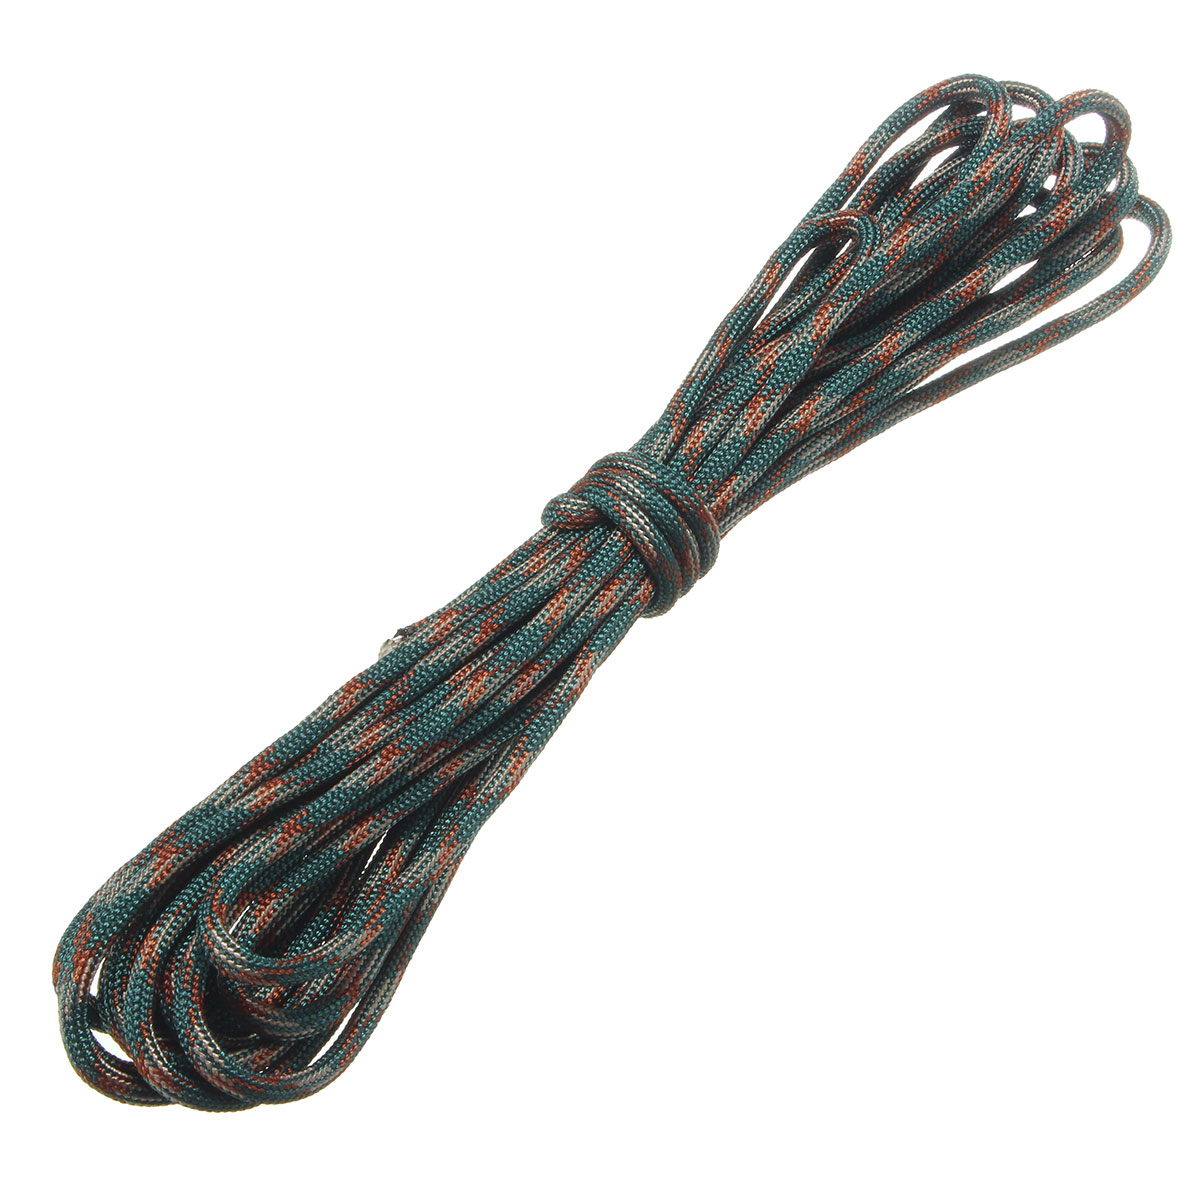 15ft-5m-7-Inner-Strand-505-550-Mil-Survival-Paracord-Bushcraft-Survival-Cord-Lanyard-Rope-Type-III-1349688-4